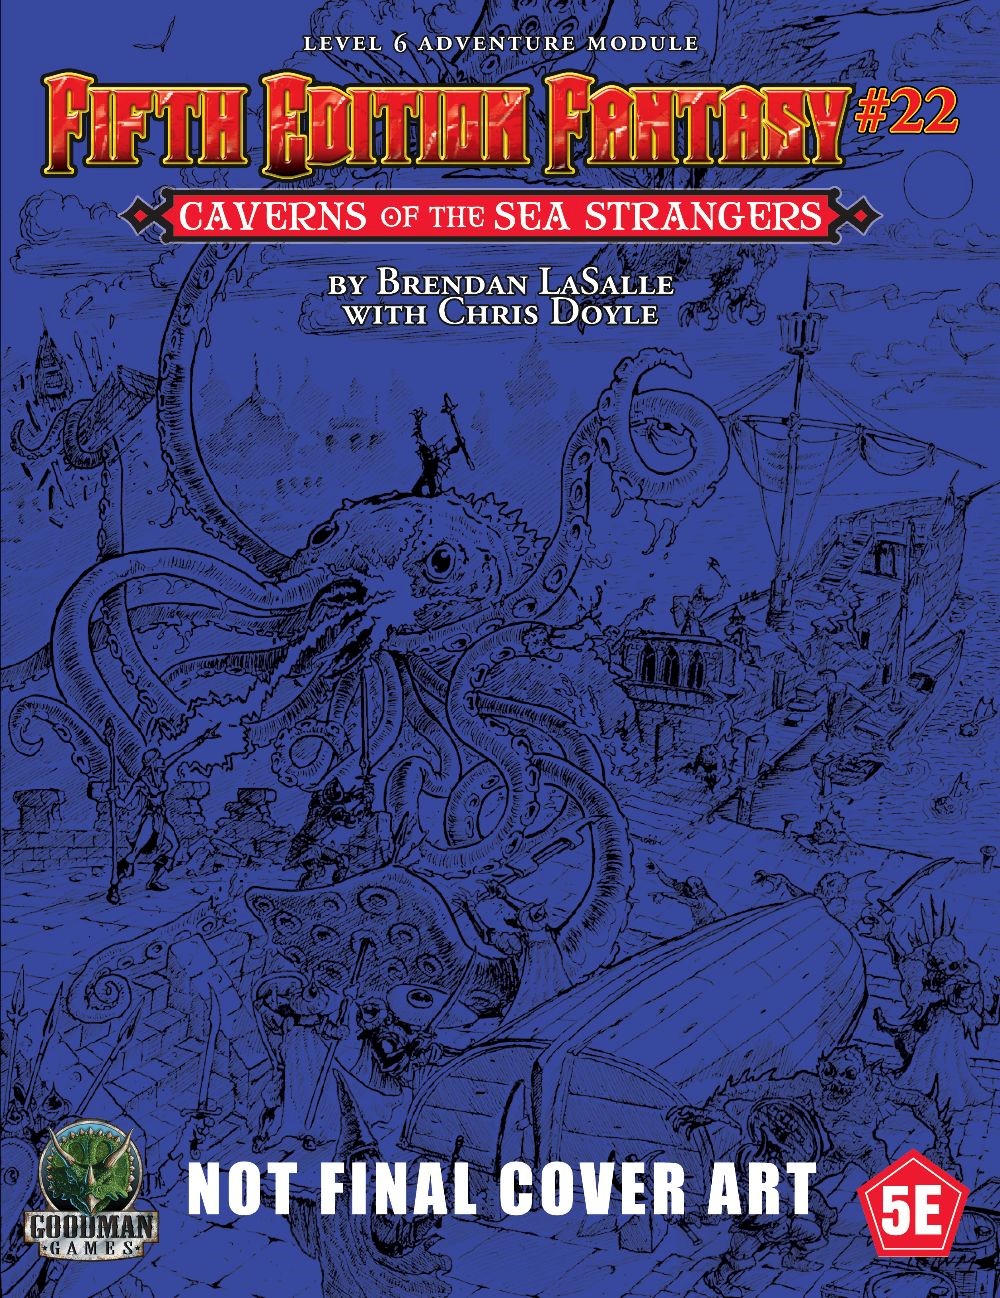 Dungeons & Dragons (5th Ed.): Fifth Edition Fantasy #22: CAVERNS OF THE SEA STRANGERS 